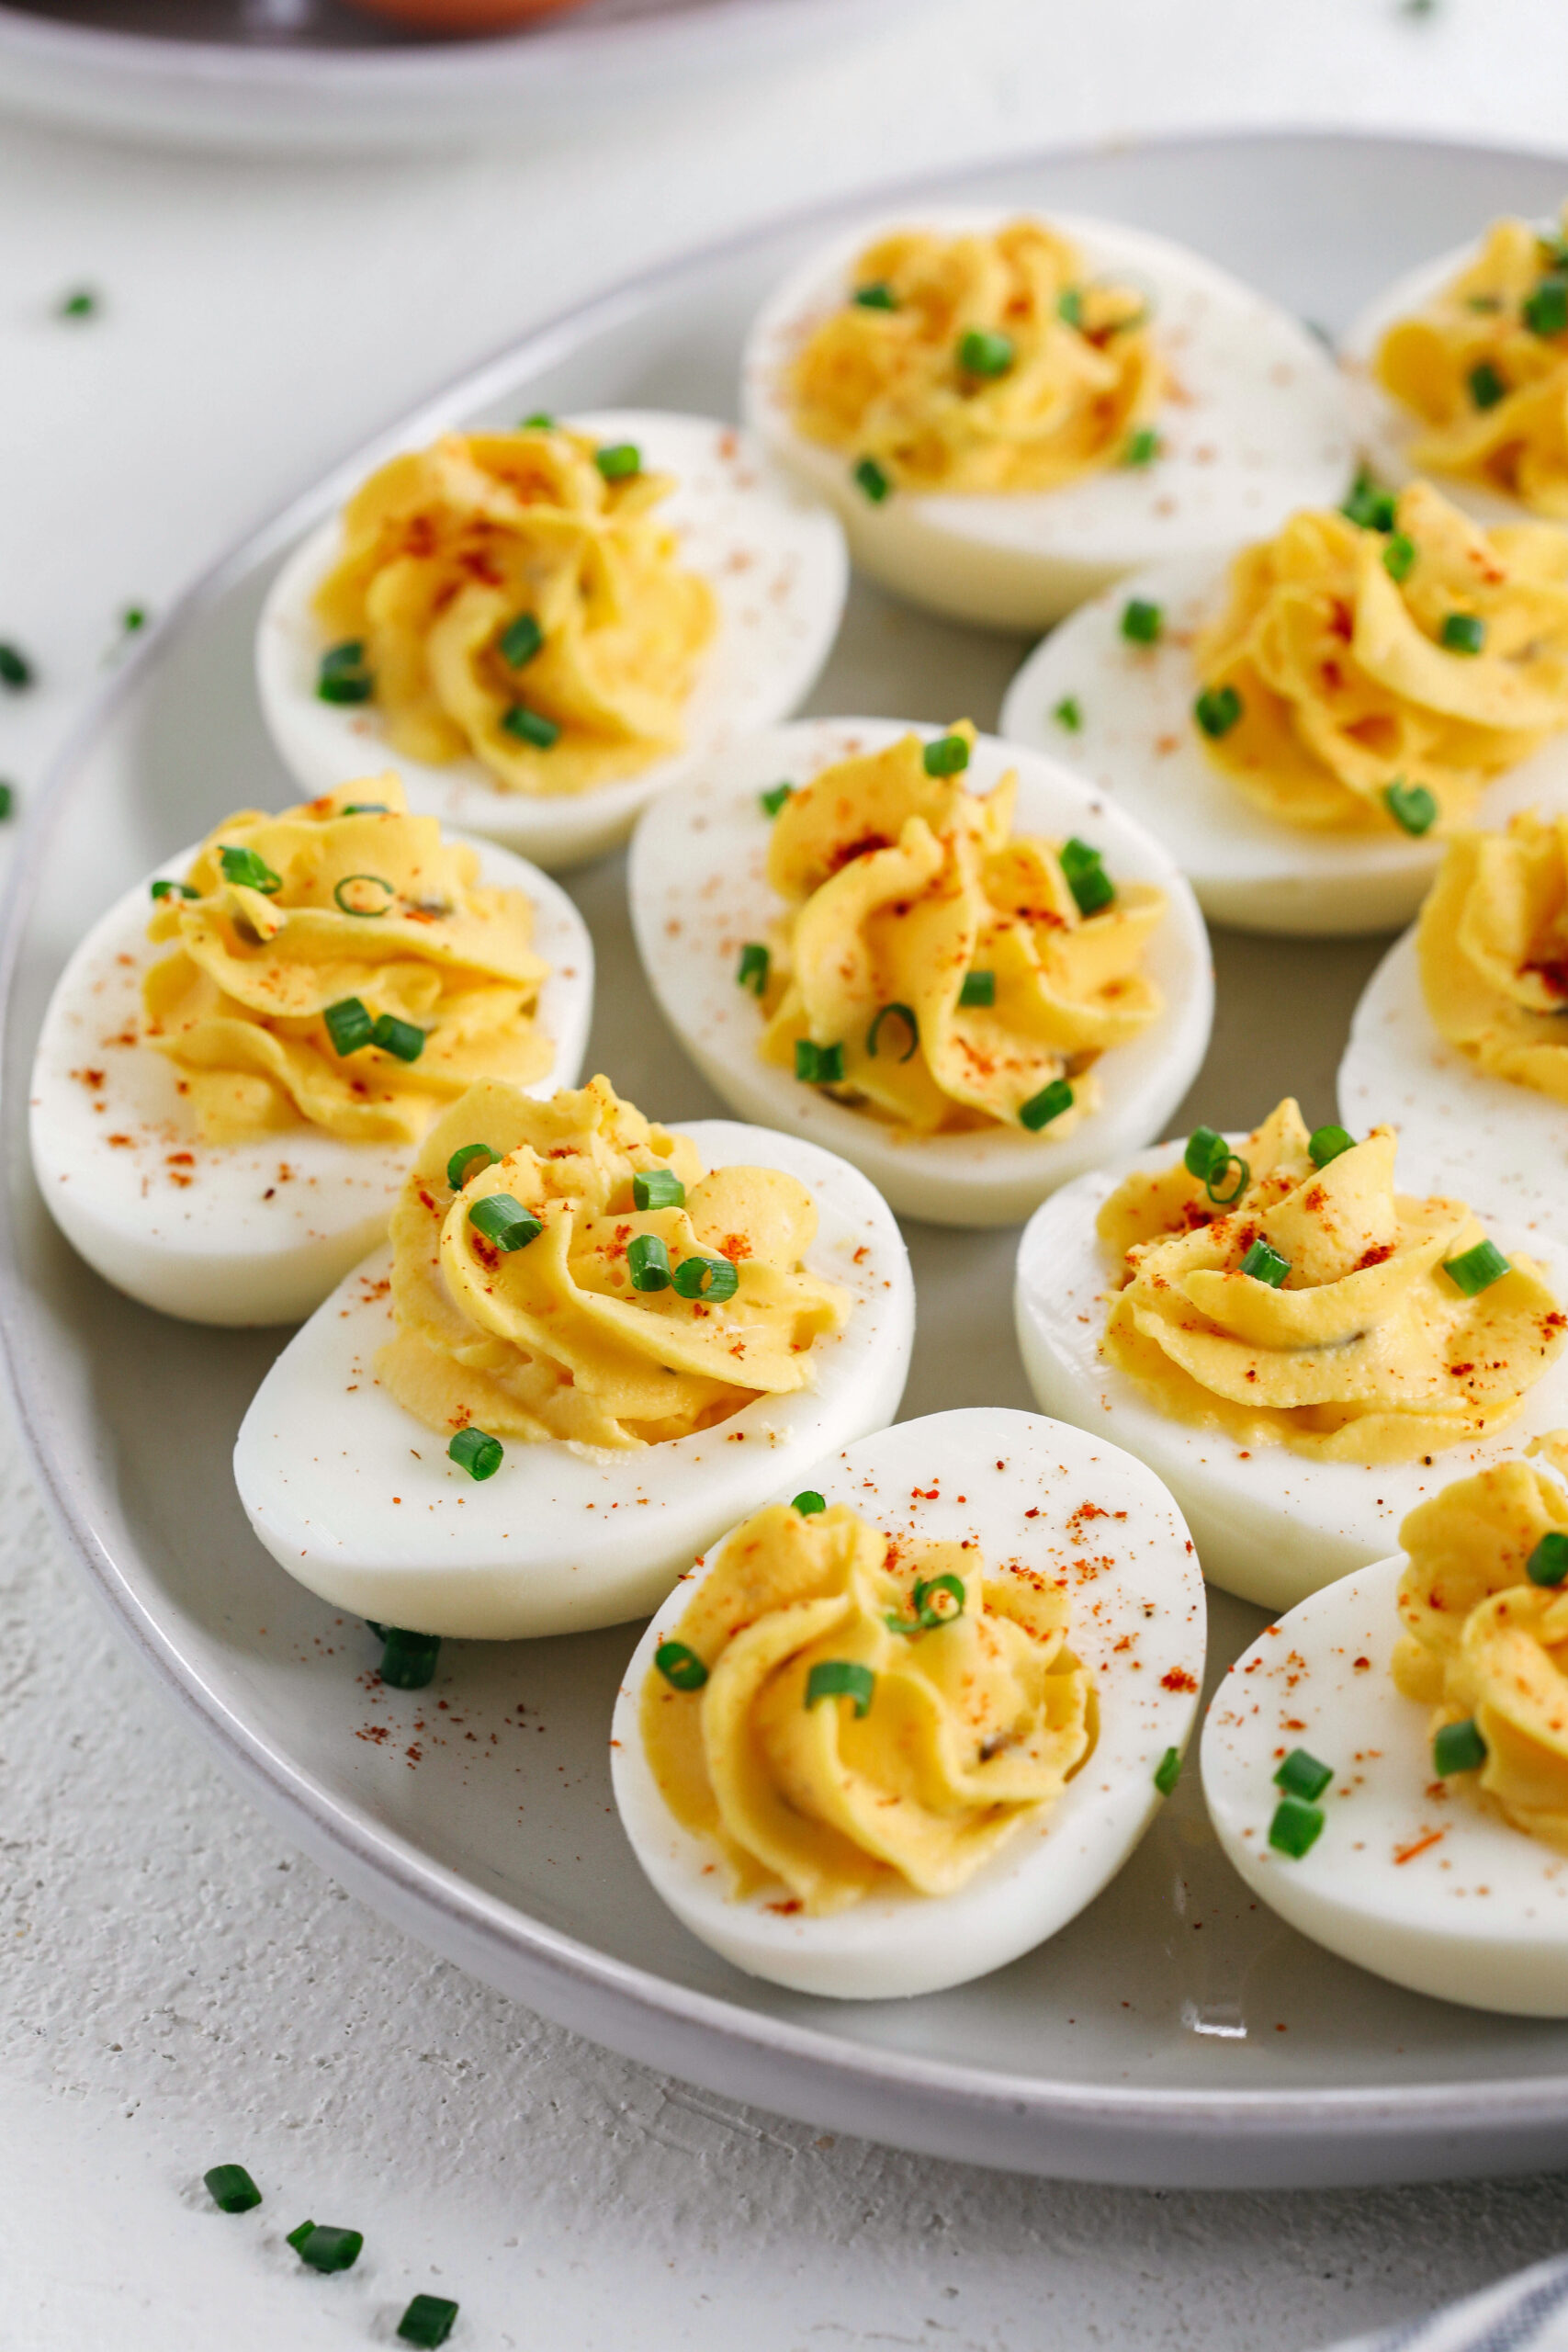 These Healthier Deviled Eggs are a classic recipe that are much lighter in calories thanks to using Greek yogurt!  Perfect for parties, Sunday brunch or even a delicious afternoon snack! 